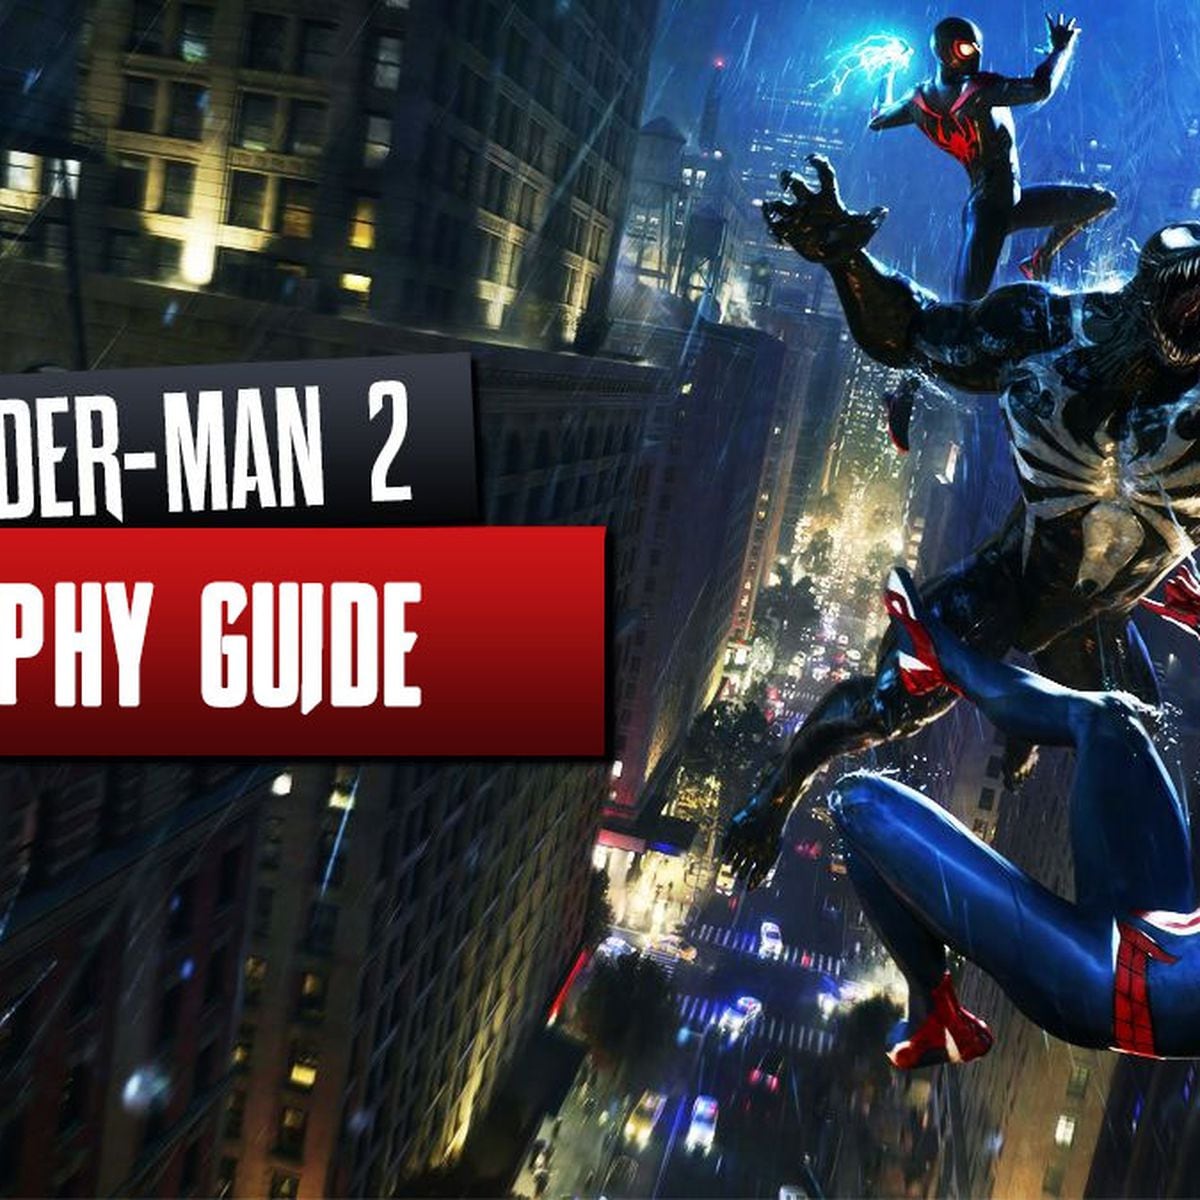 Marvel's Spider-Man 2 Trophies Guide: How to get all the Trophies and how  to get Platinum - Meristation